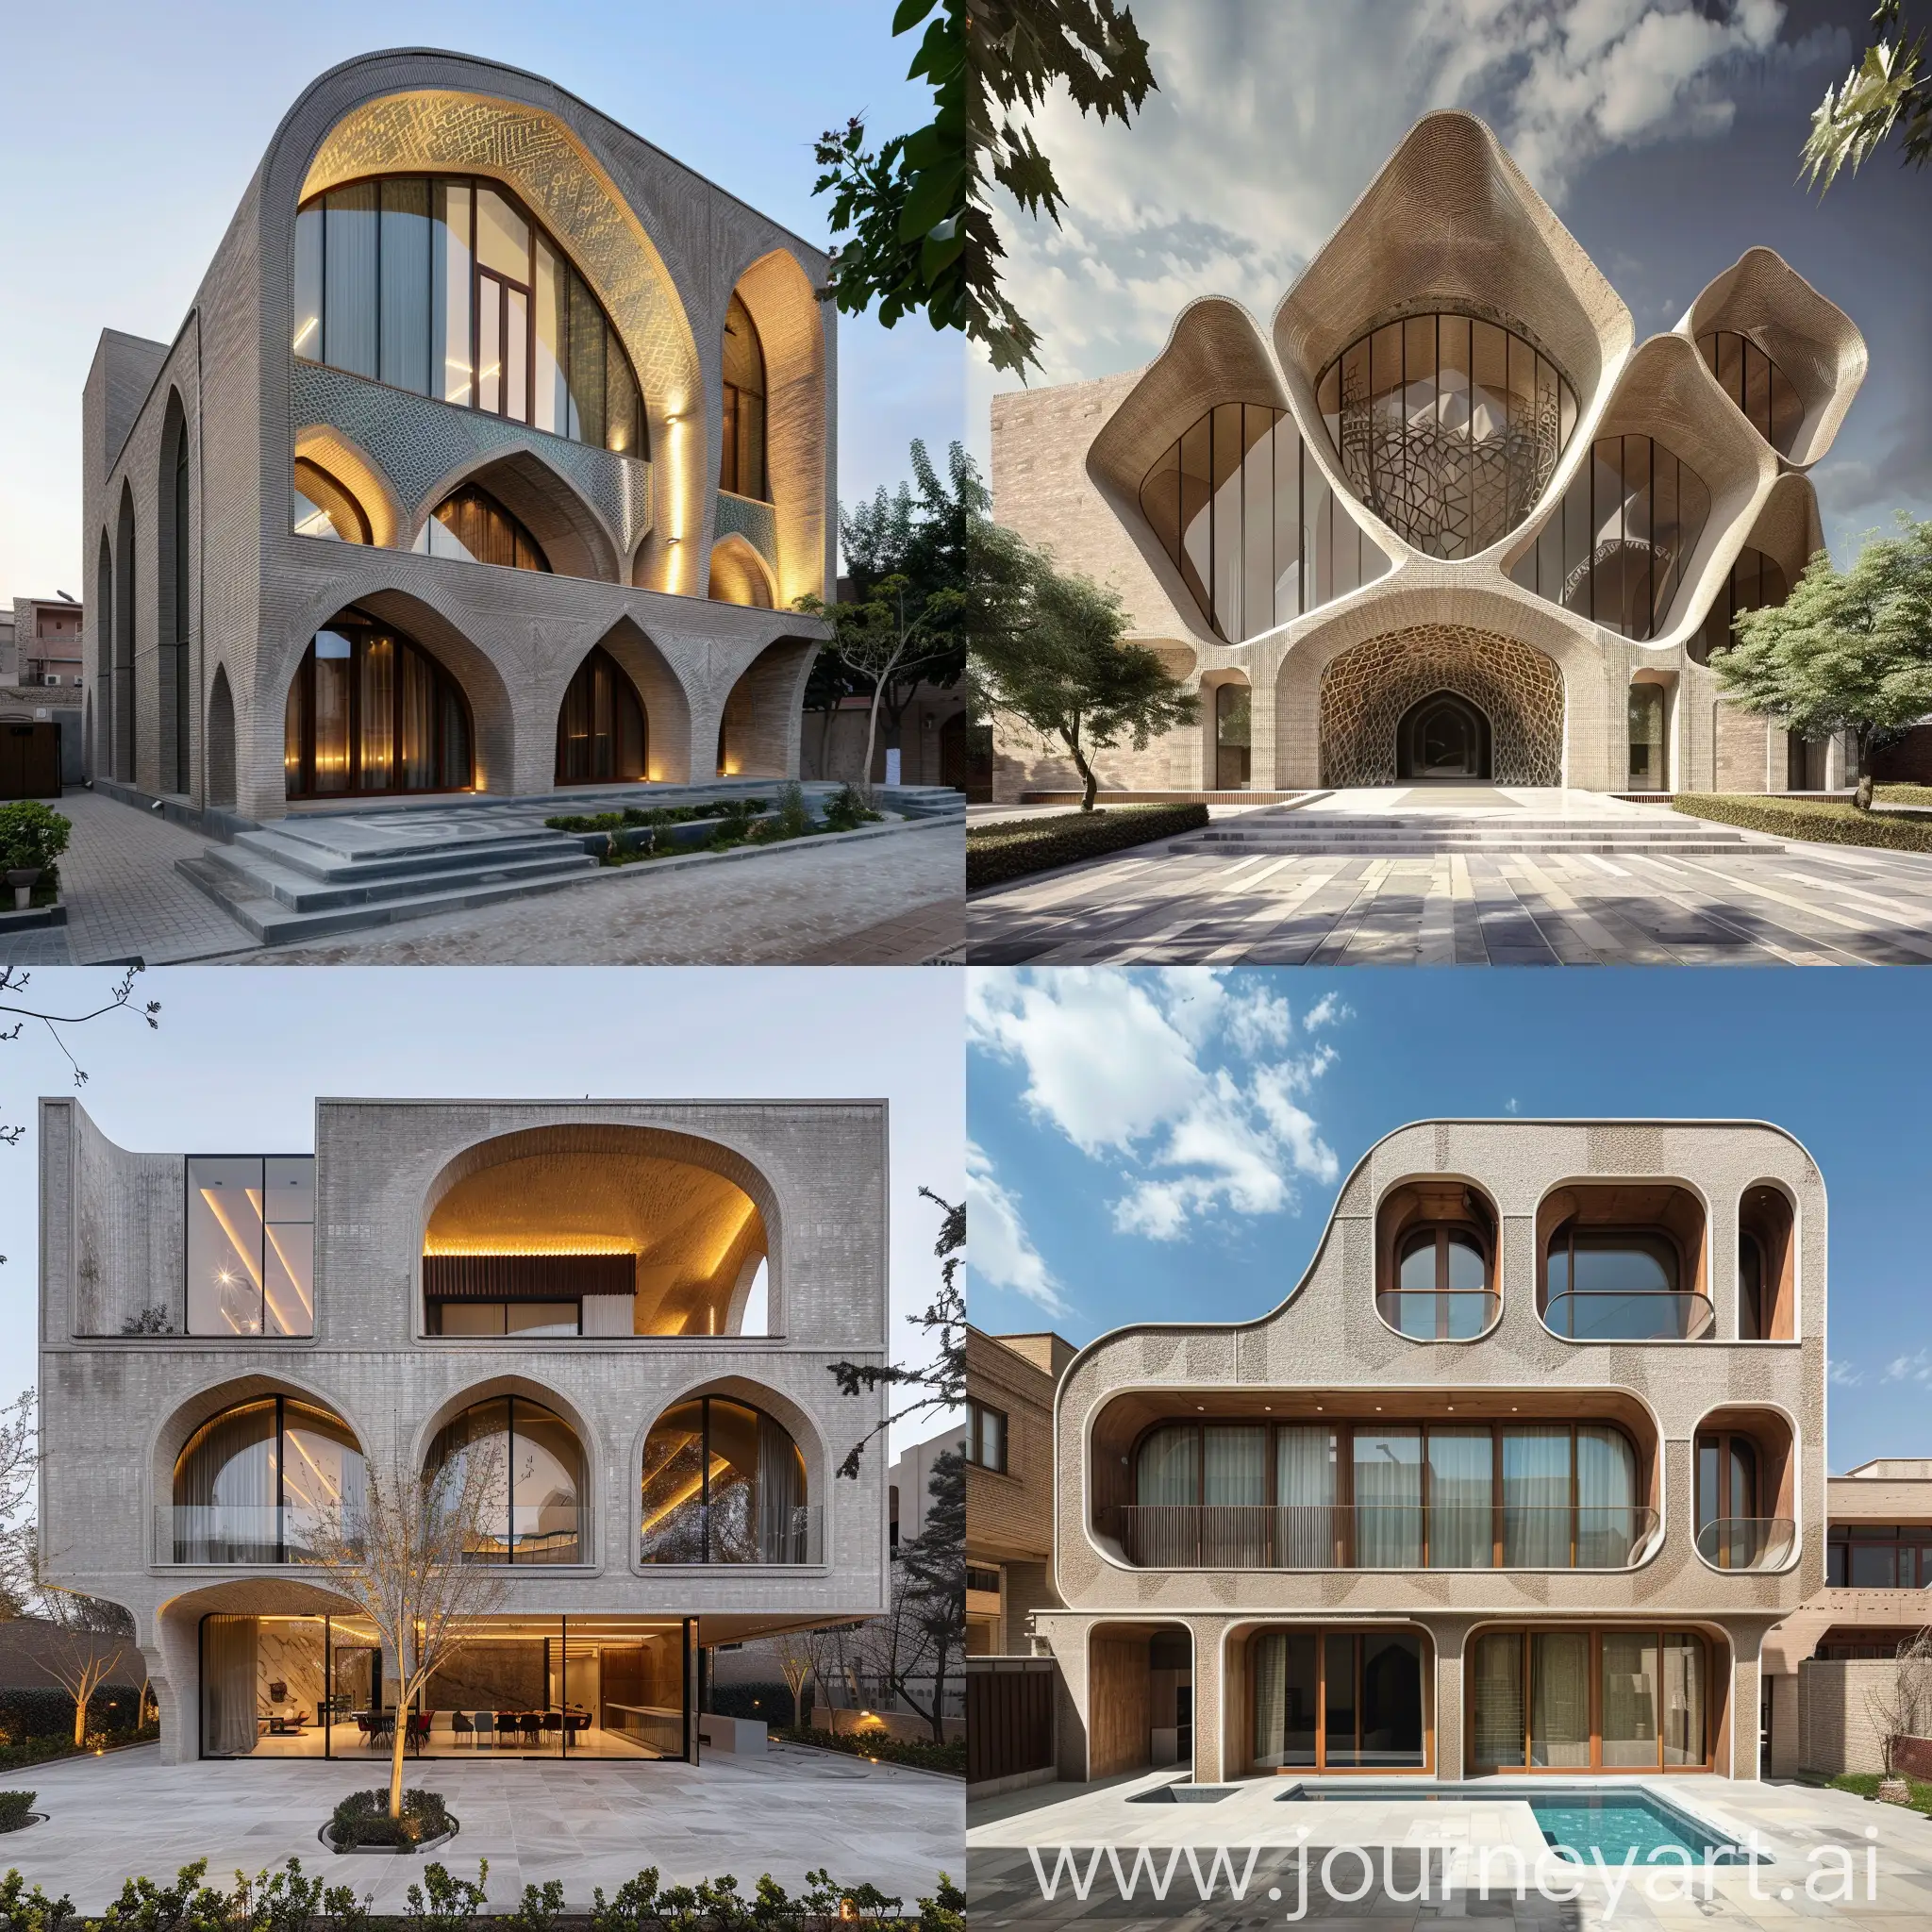 combination of Tabriz Architecture and parametric modern Architecture